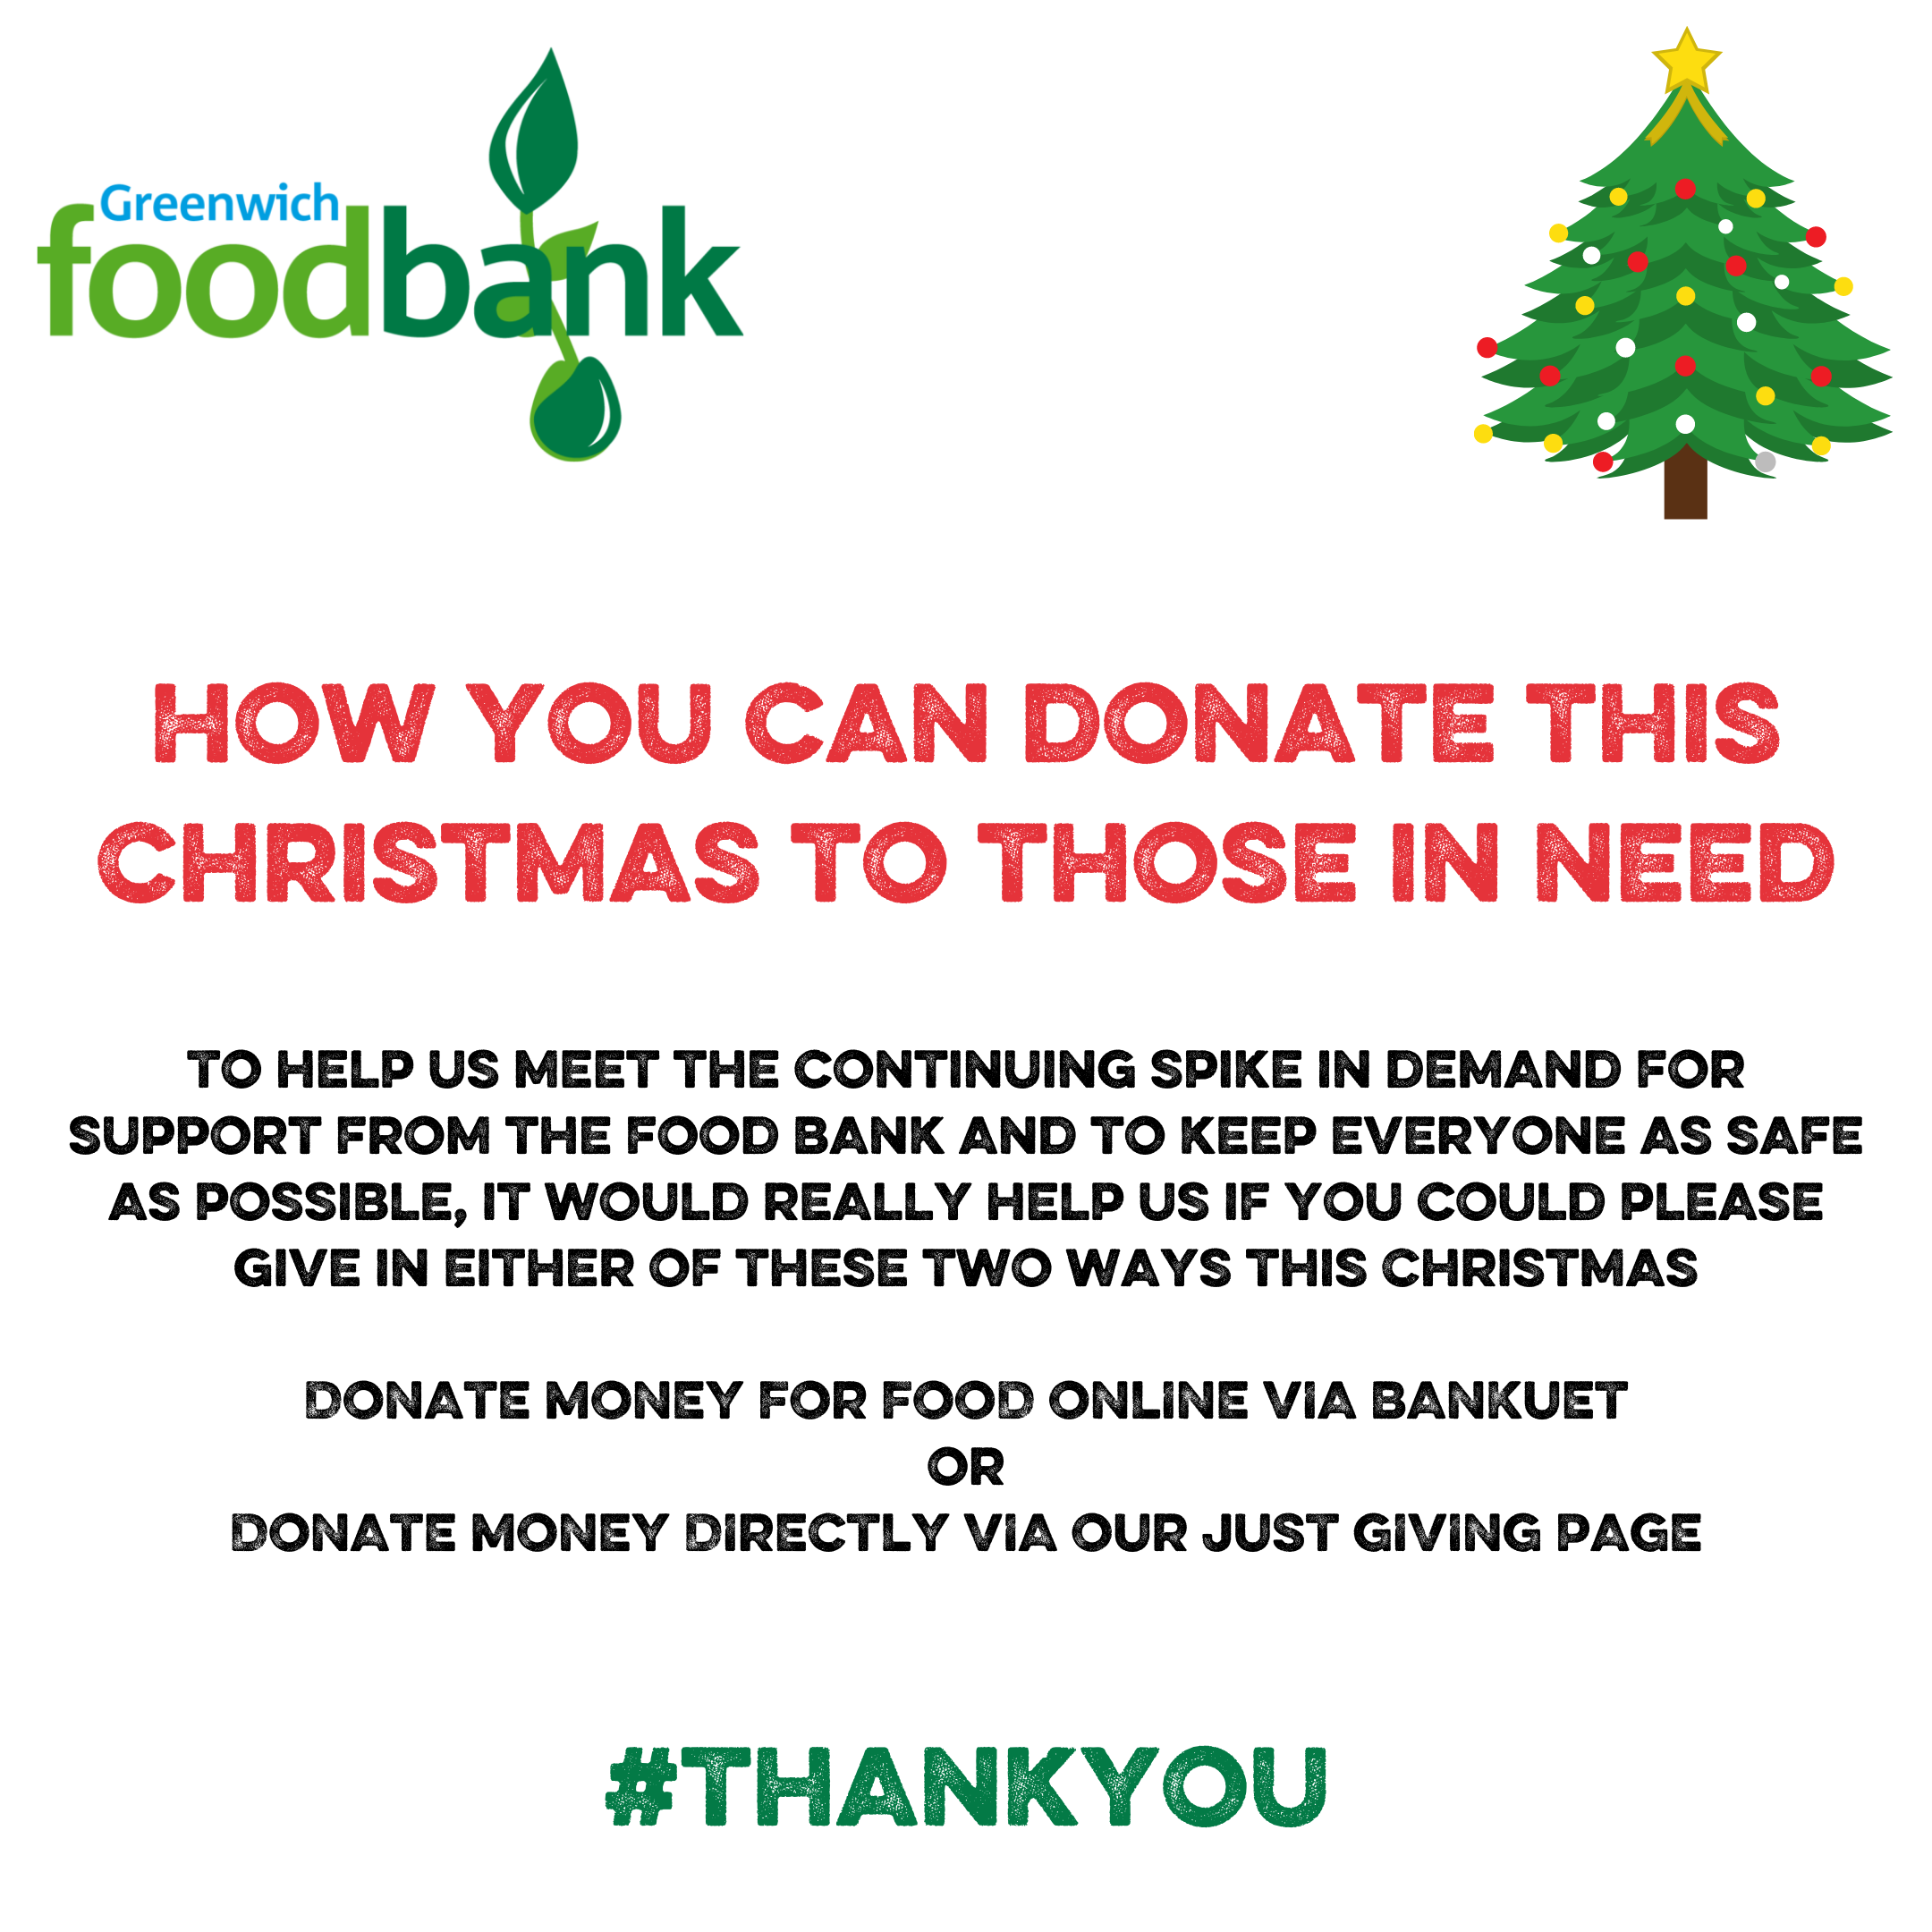 Donations this Christmas | Greenwich Foodbank